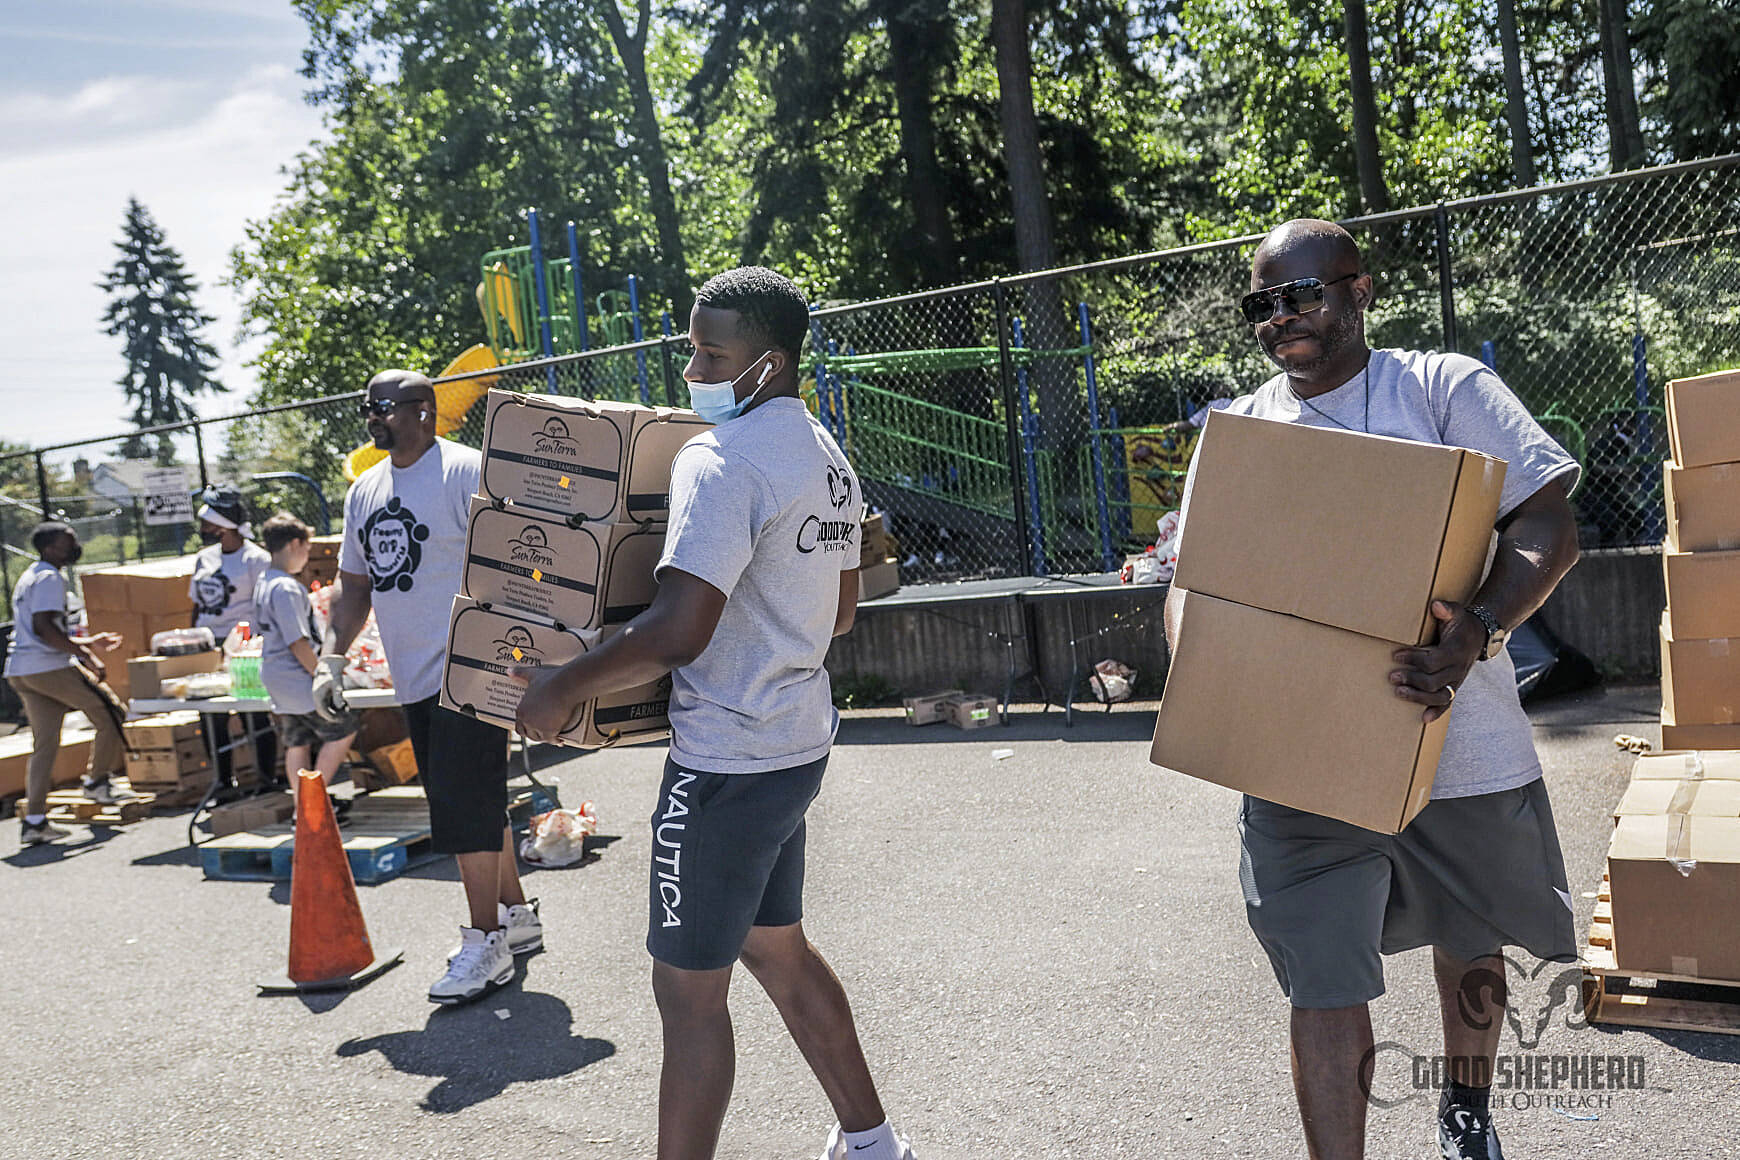 Photos courtesy of Good Shepherd Youth Outreach
Louis Guiden, right, began the Feeding Our Community program in April 2020. Since then, they distribute food to about 1,600 families per month.